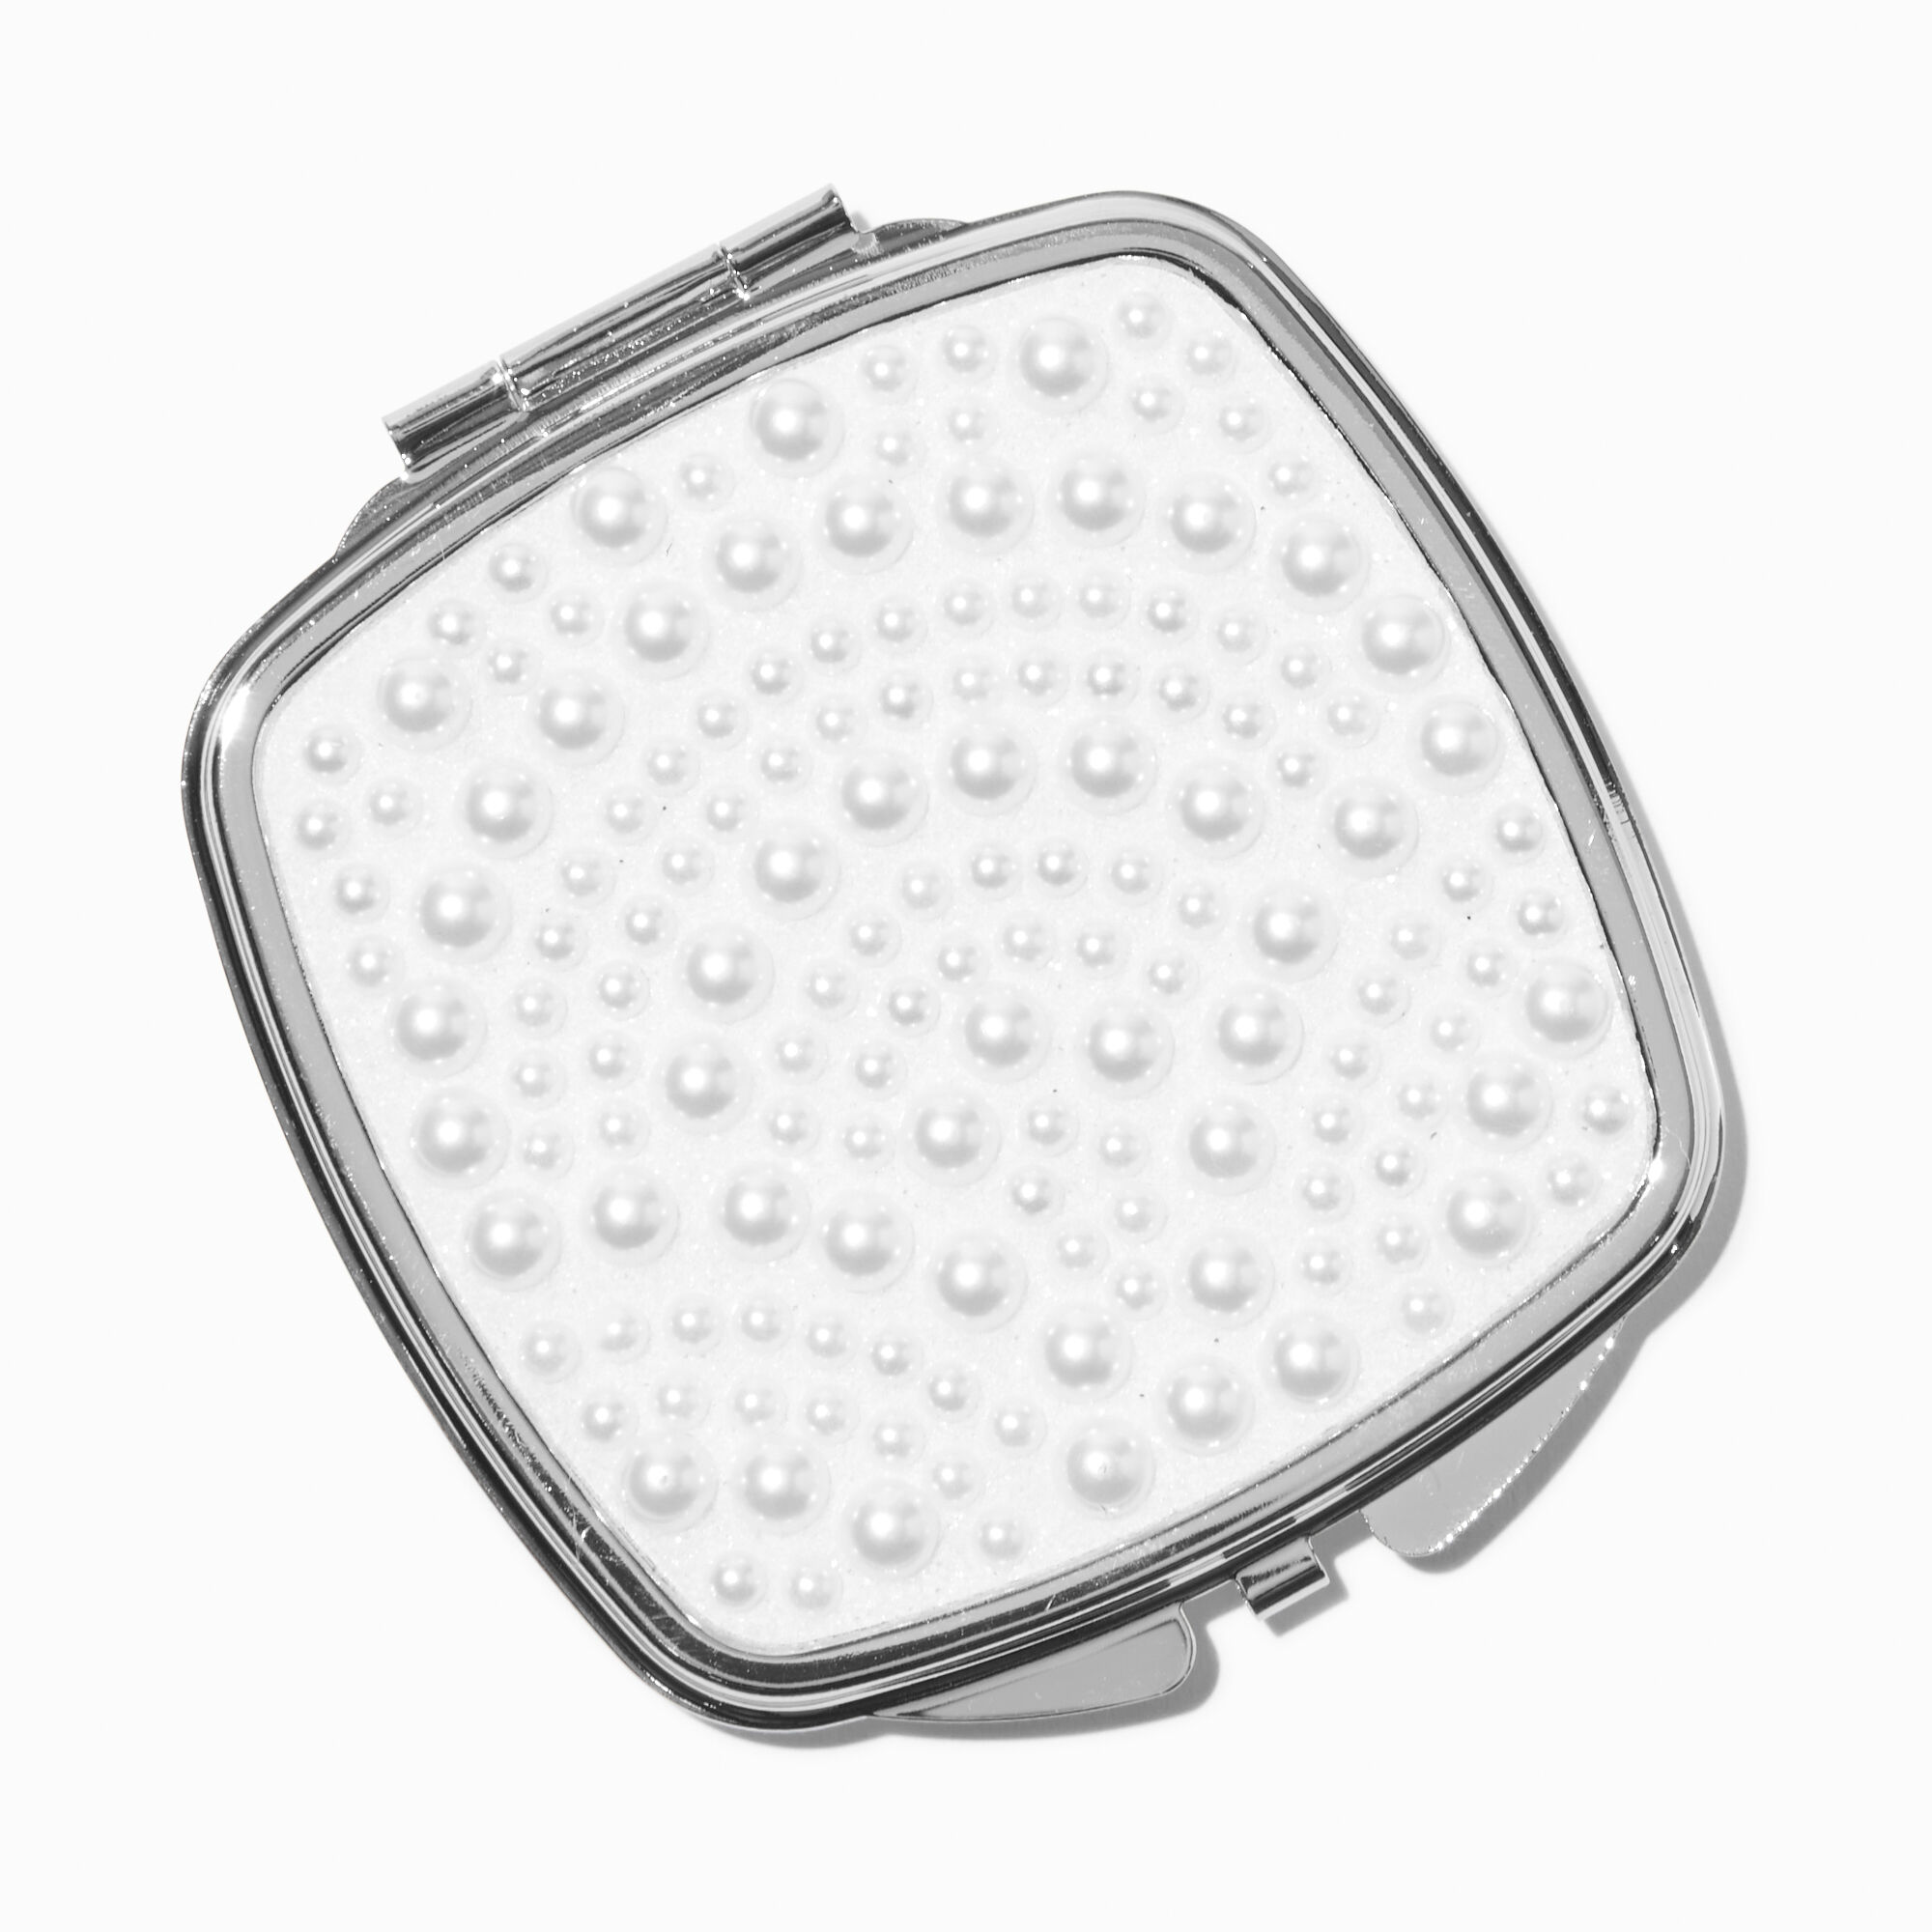 View Claires Scalloped Pearl Compact Mirror information